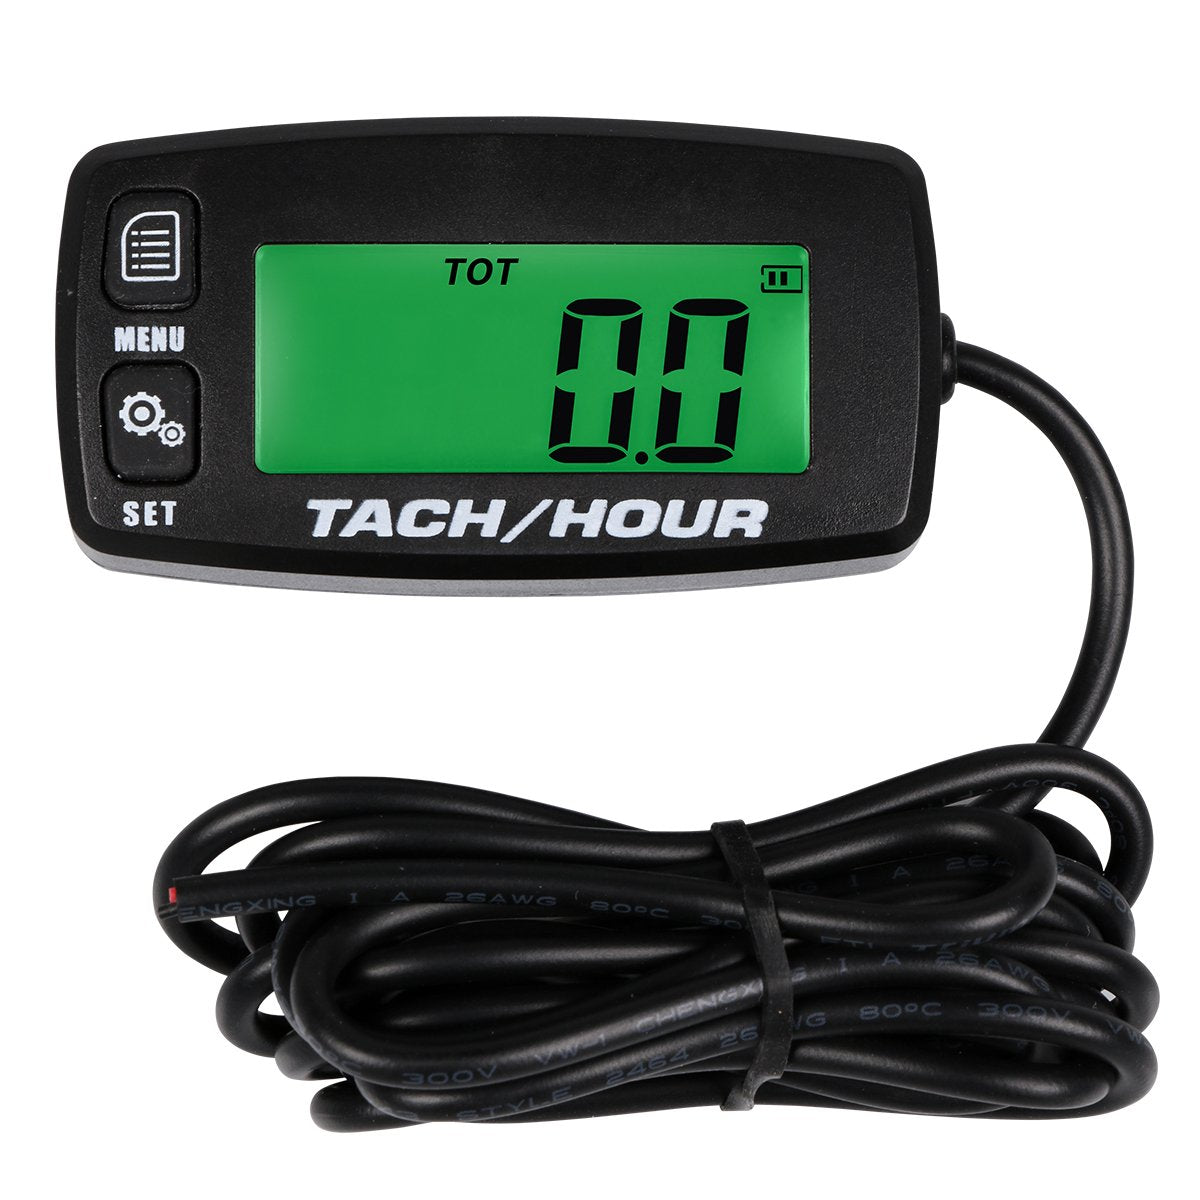 Searon Tach Hour Meter Tachometer - Inductive Tachometer for Outboard Engine Chain Saws Tractors Lawnmowers Motorcycles Marine Engines RC Toys PWC ATV